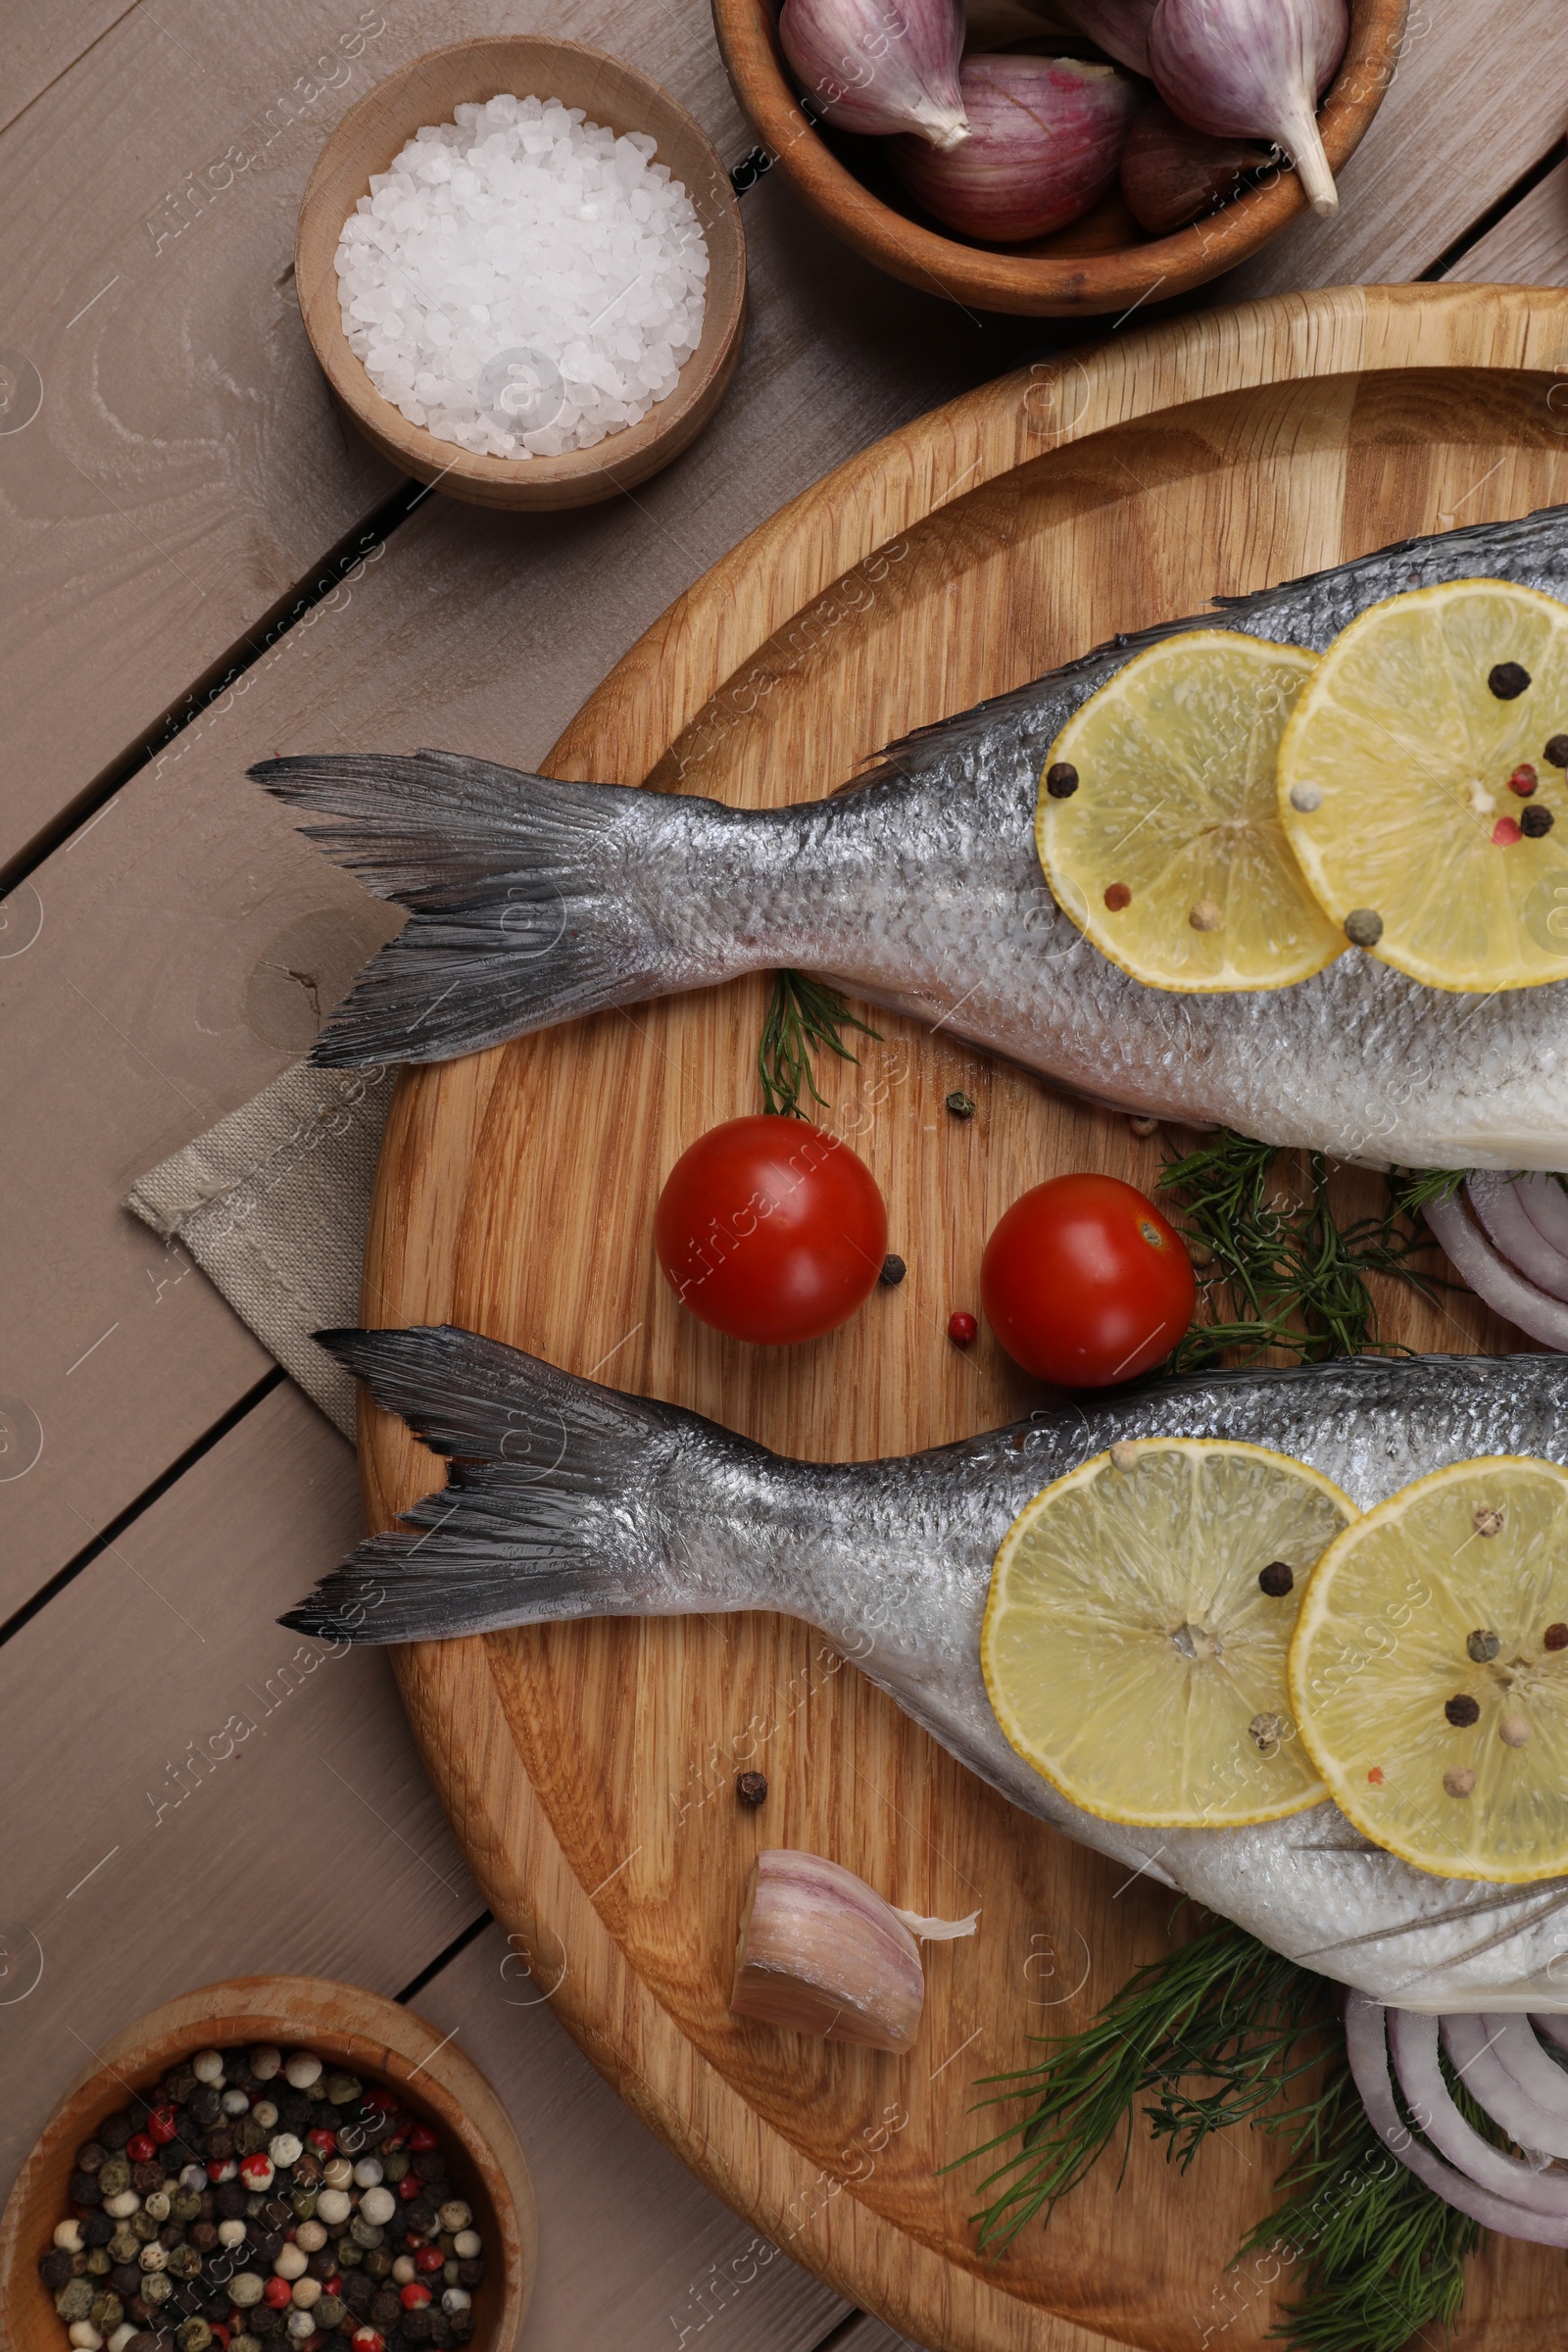 Photo of Raw dorado fish, lemon, spices and tomatoes on wooden table, flat lay